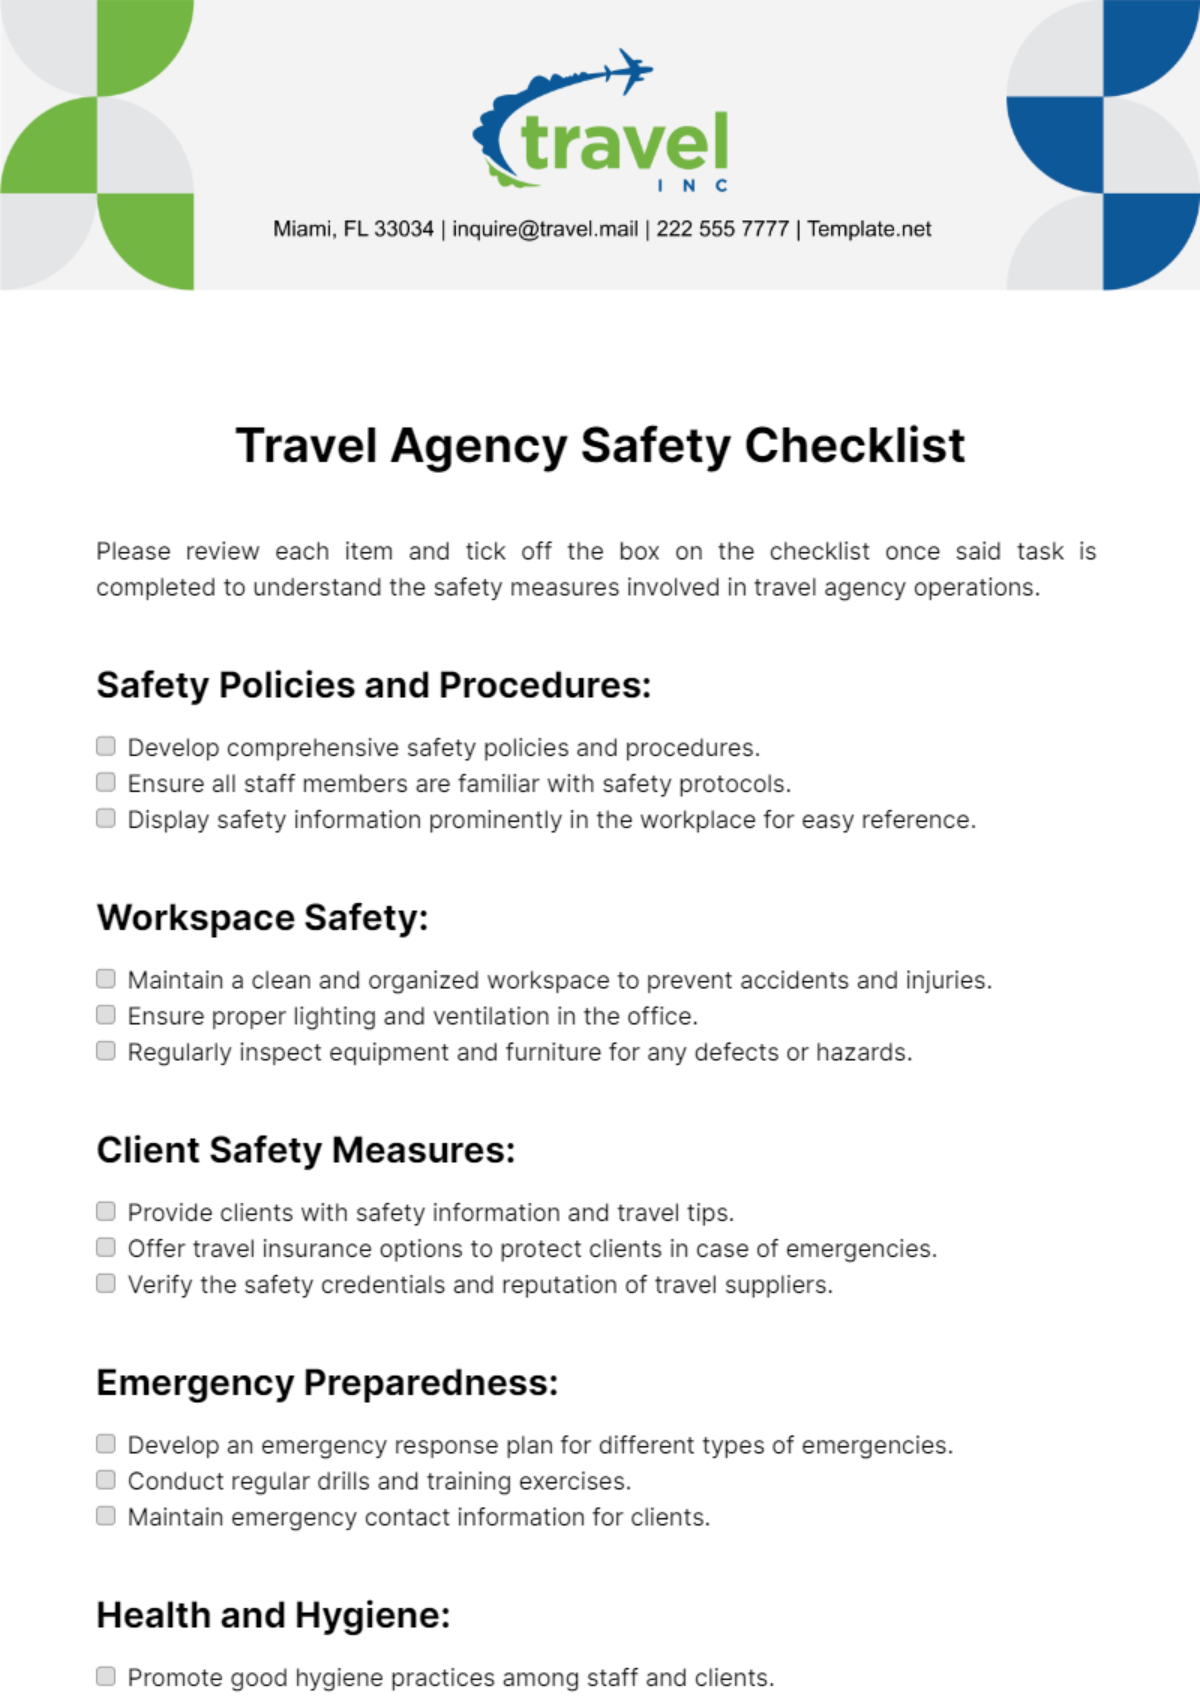 Travel Agency Safety Checklist Template